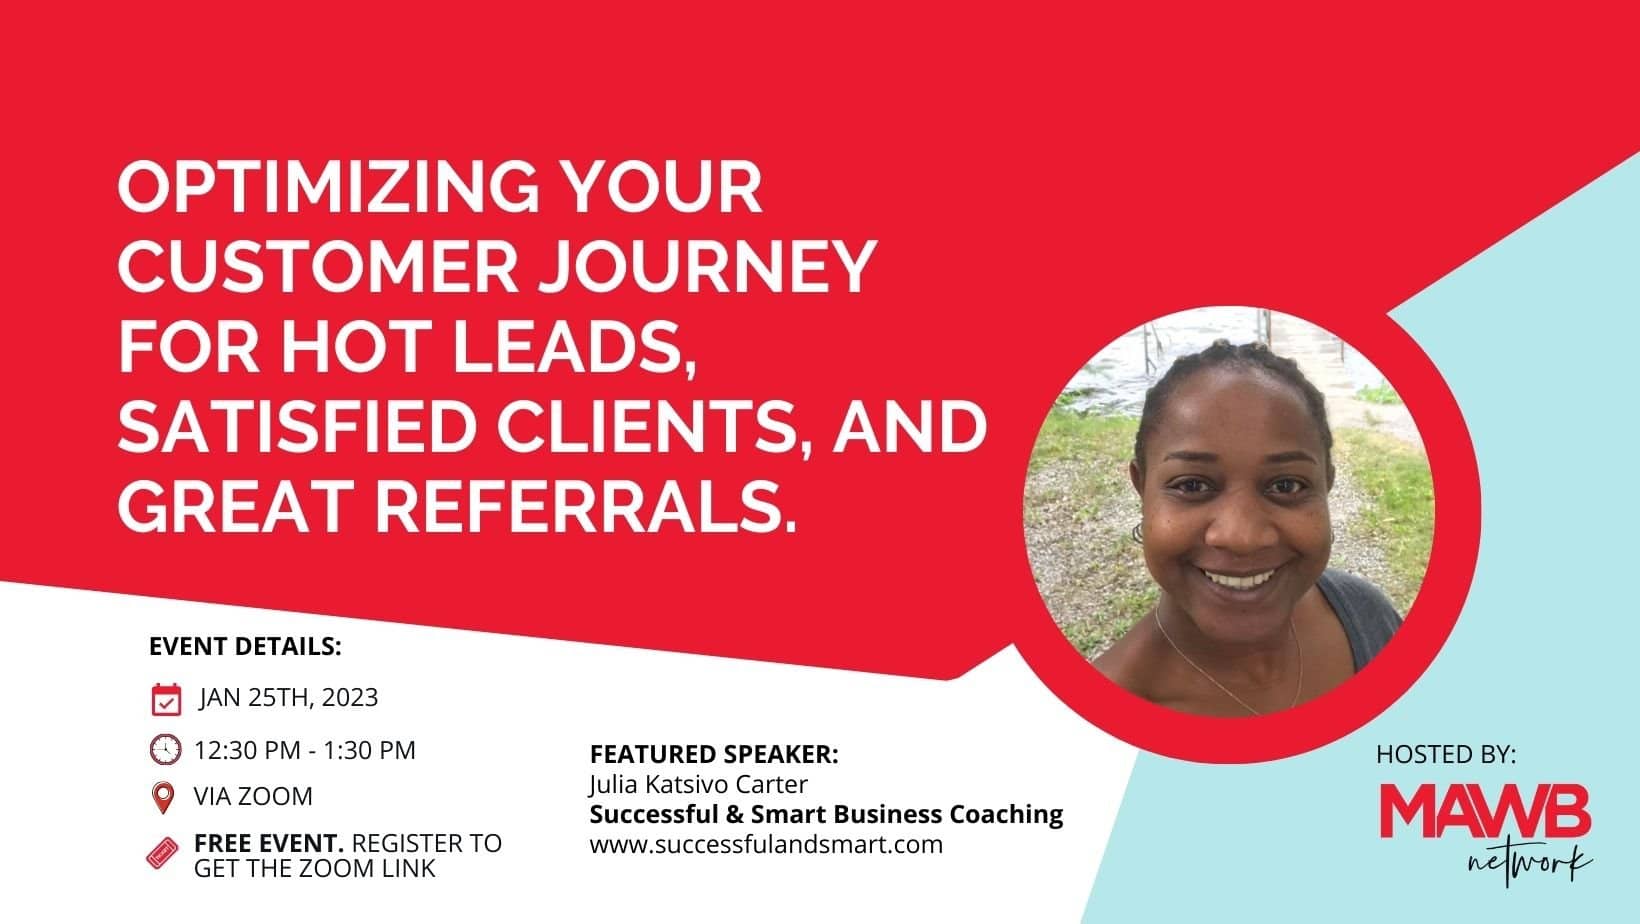 Optimizing your Customer Journey for Hot Leads, Satisfied Clients, & Great Referrals